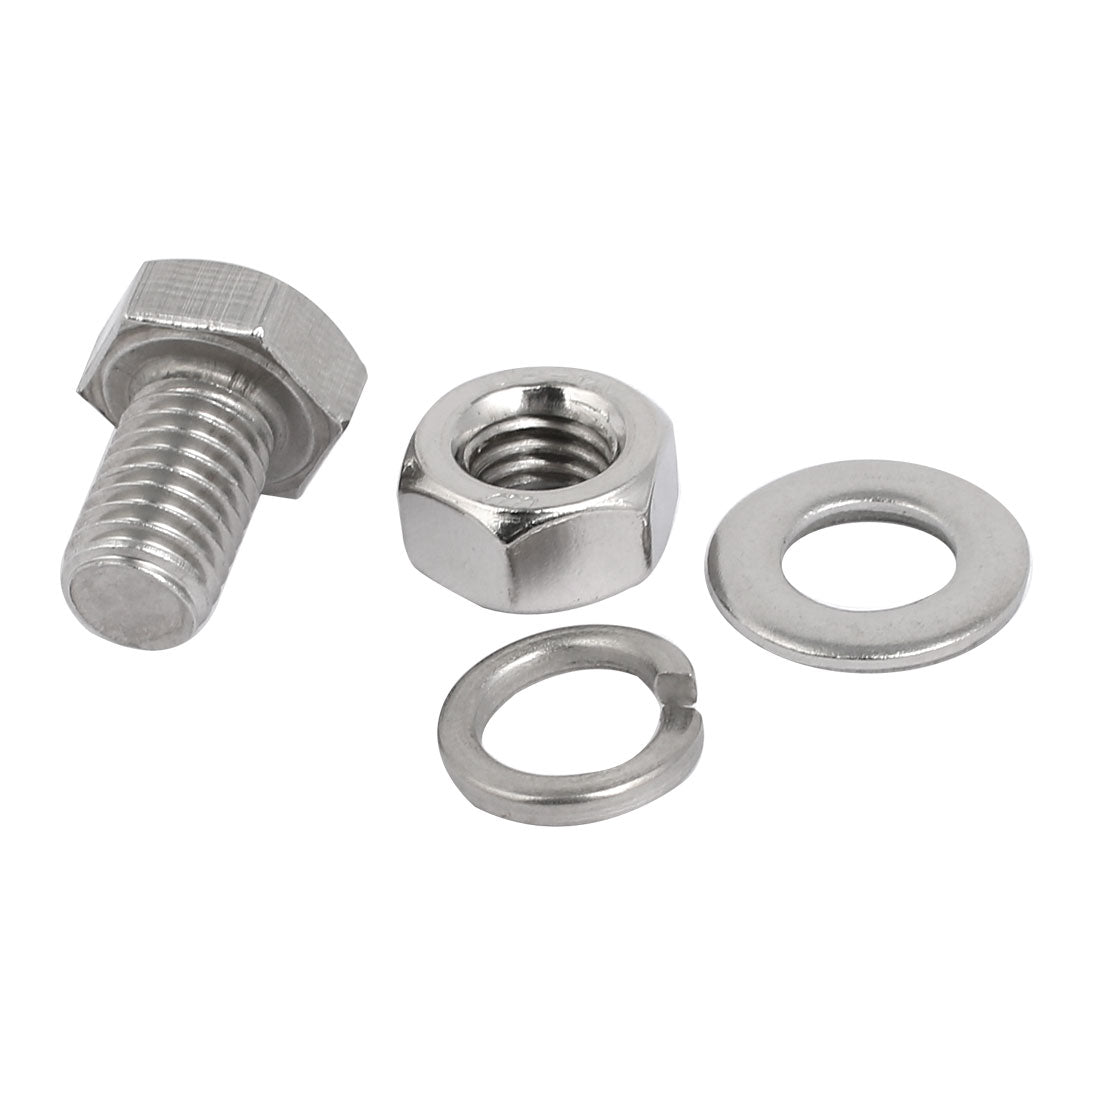 uxcell Uxcell 5 Set M10x20mm 304 Stainless Steel Hex Bolts w Nuts and Washers Assortment Kit